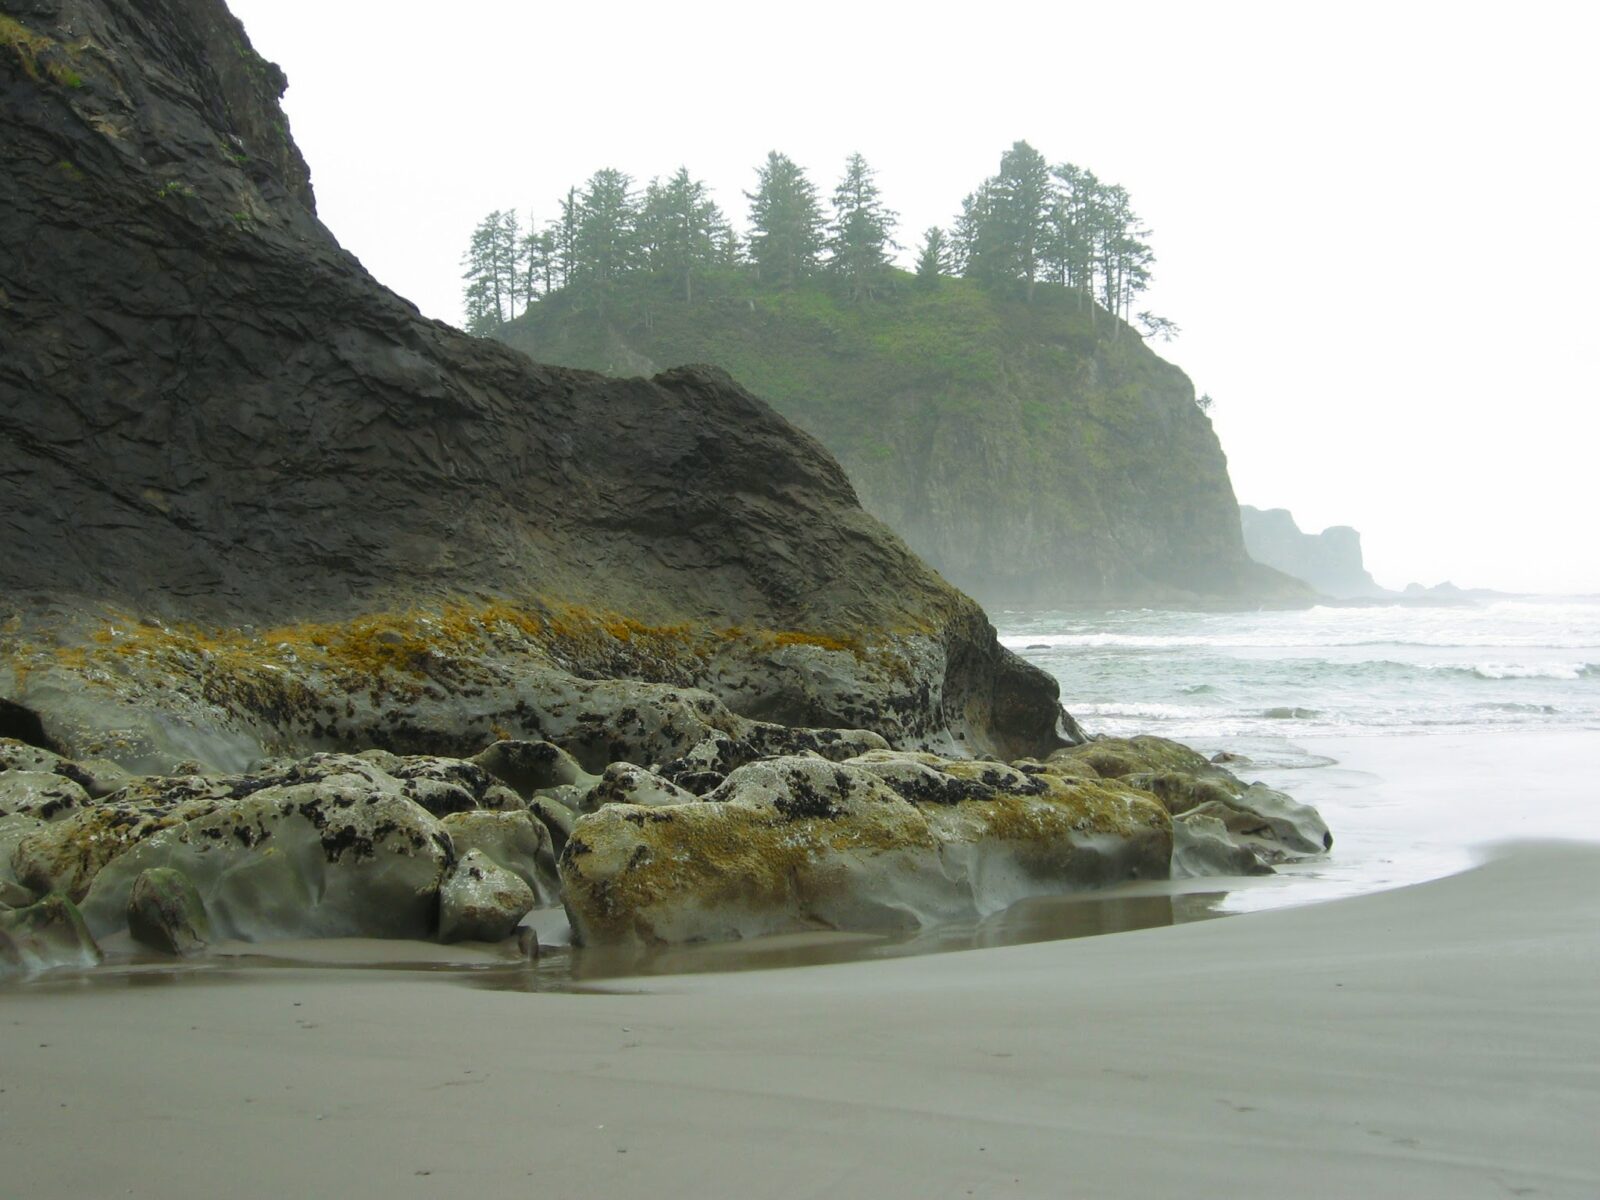 A foggy day on a sandy beach at the ocean. There are rocks in the foreground and forested and rocky islands in the water